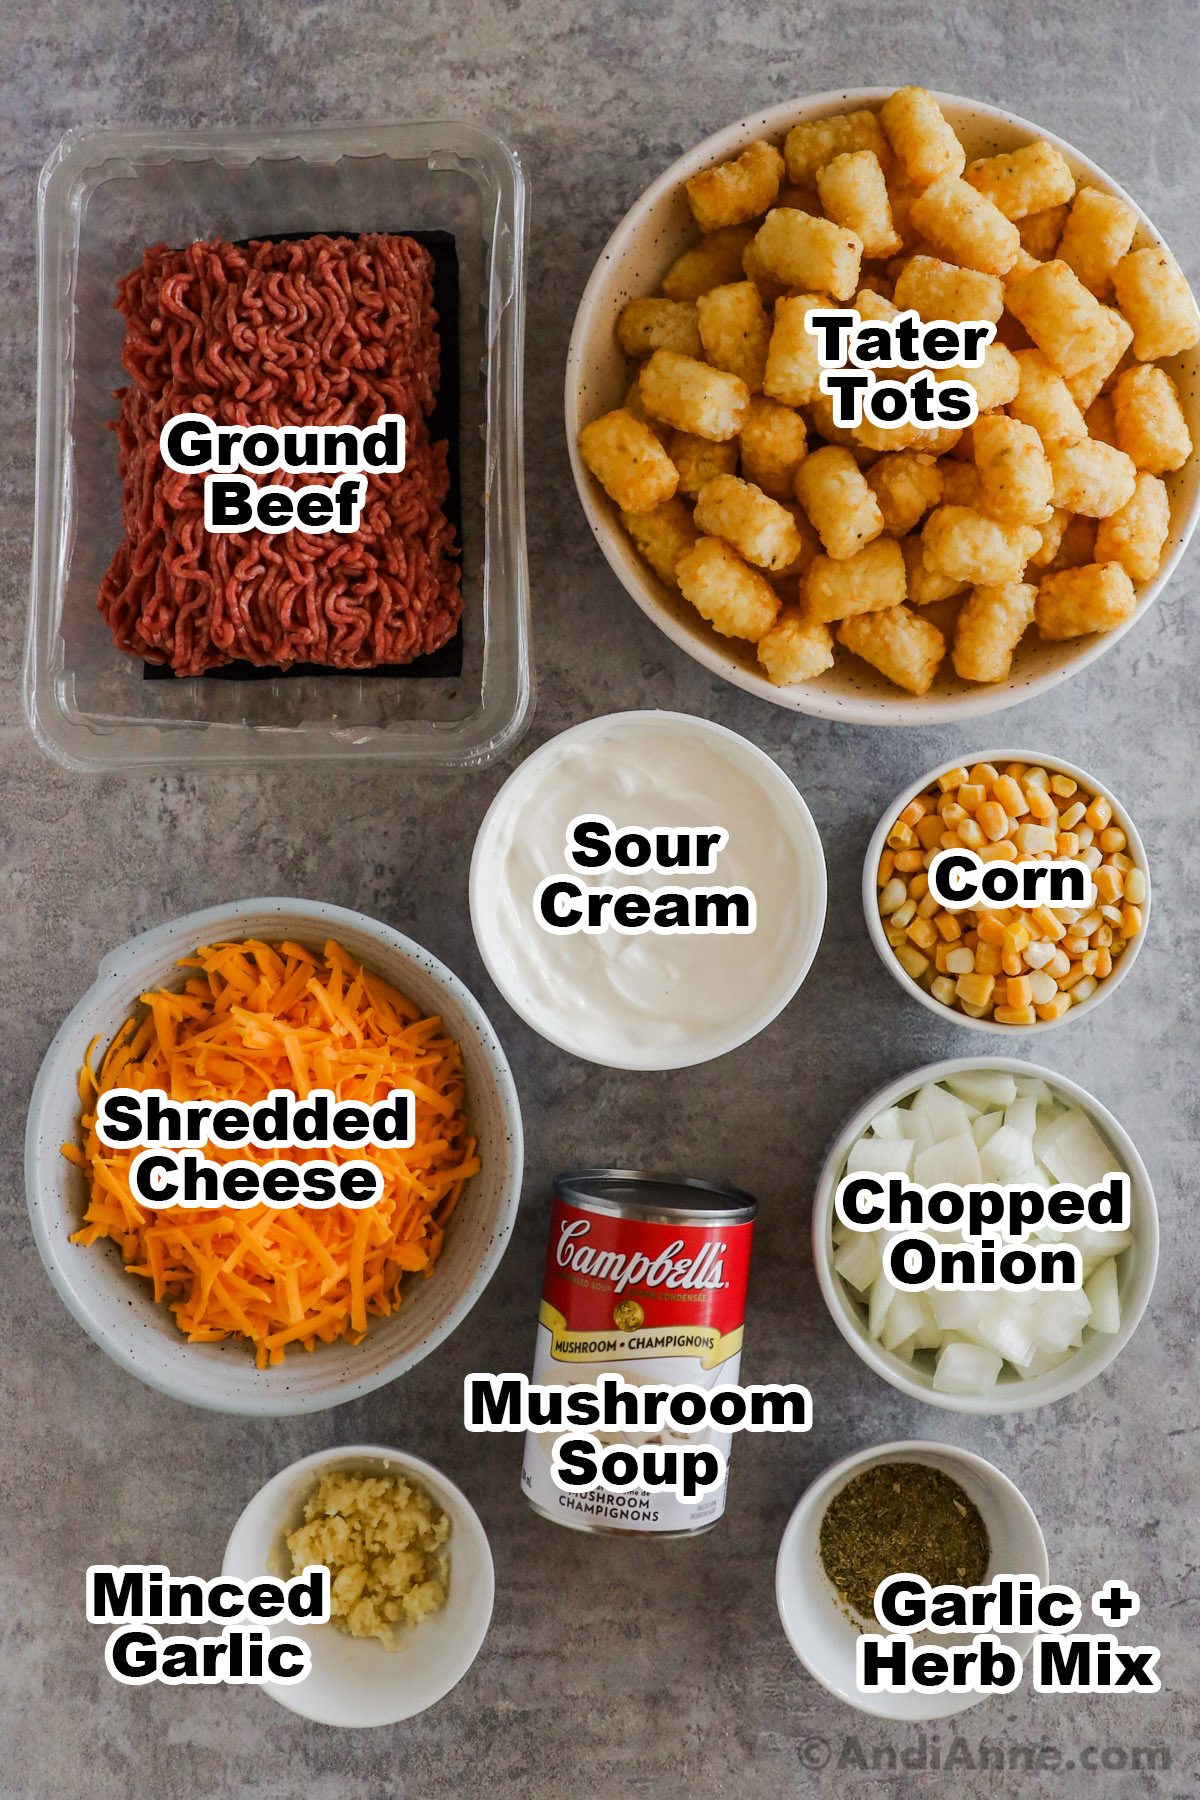 overhead view of all the ingredients in separate bowls: Ground Beef, Tater Tots, Sour Cream, Corn, Shredded Cheese, Mushroom Soup, Chopped Onion, Minced Garlic, Garlic and Herb Mix